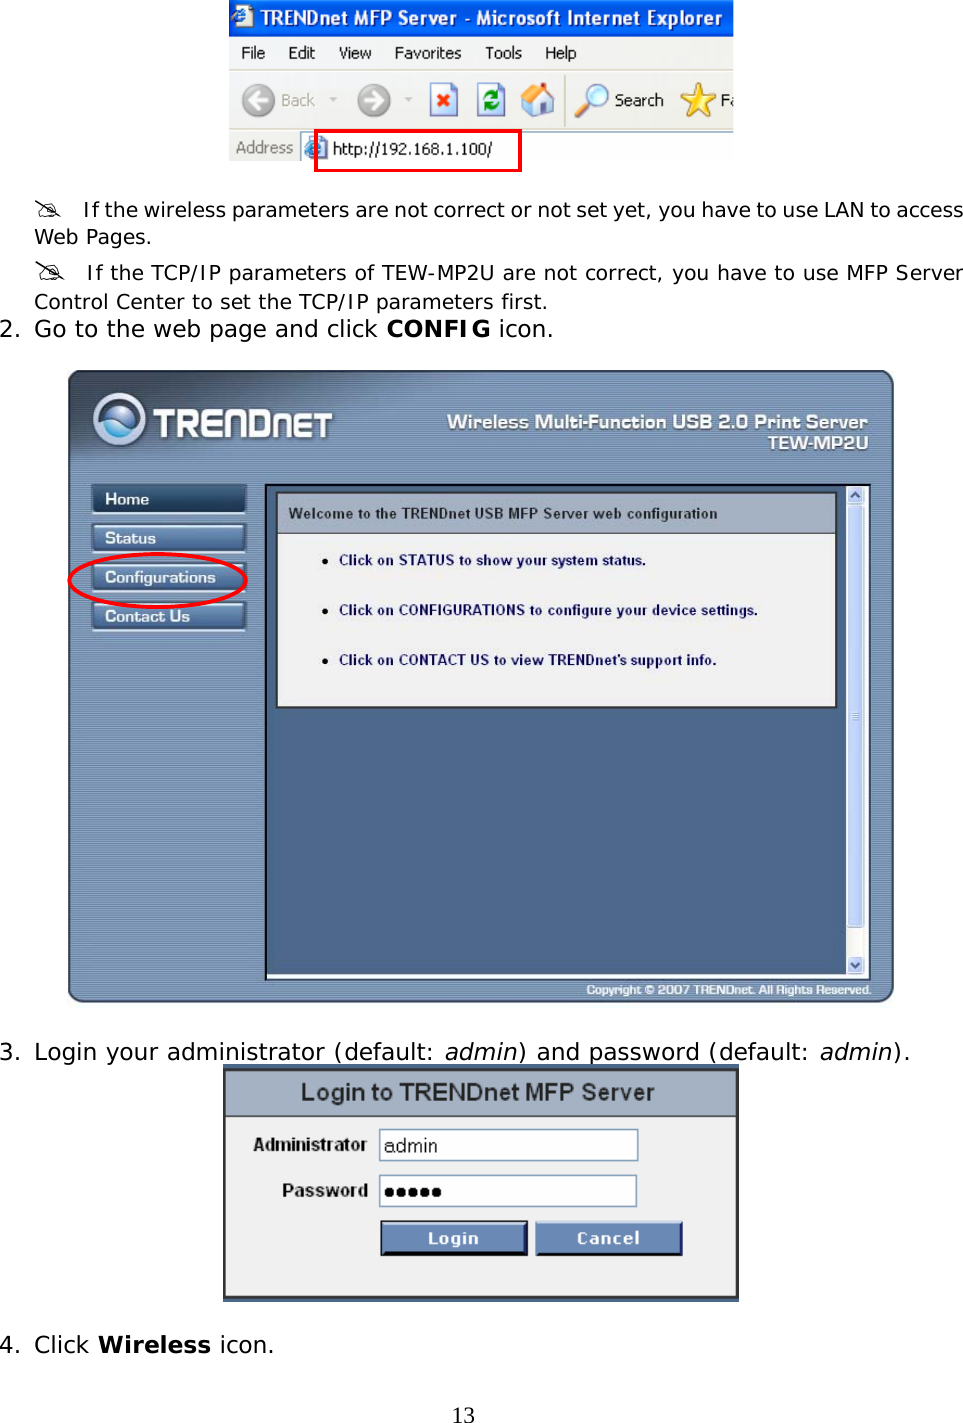     13   #    If the wireless parameters are not correct or not set yet, you have to use LAN to access Web Pages. #  If the TCP/IP parameters of TEW-MP2U are not correct, you have to use MFP Server Control Center to set the TCP/IP parameters first. 2. Go to the web page and click CONFIG icon.    3. Login your administrator (default: admin) and password (default: admin).   4. Click Wireless icon.   